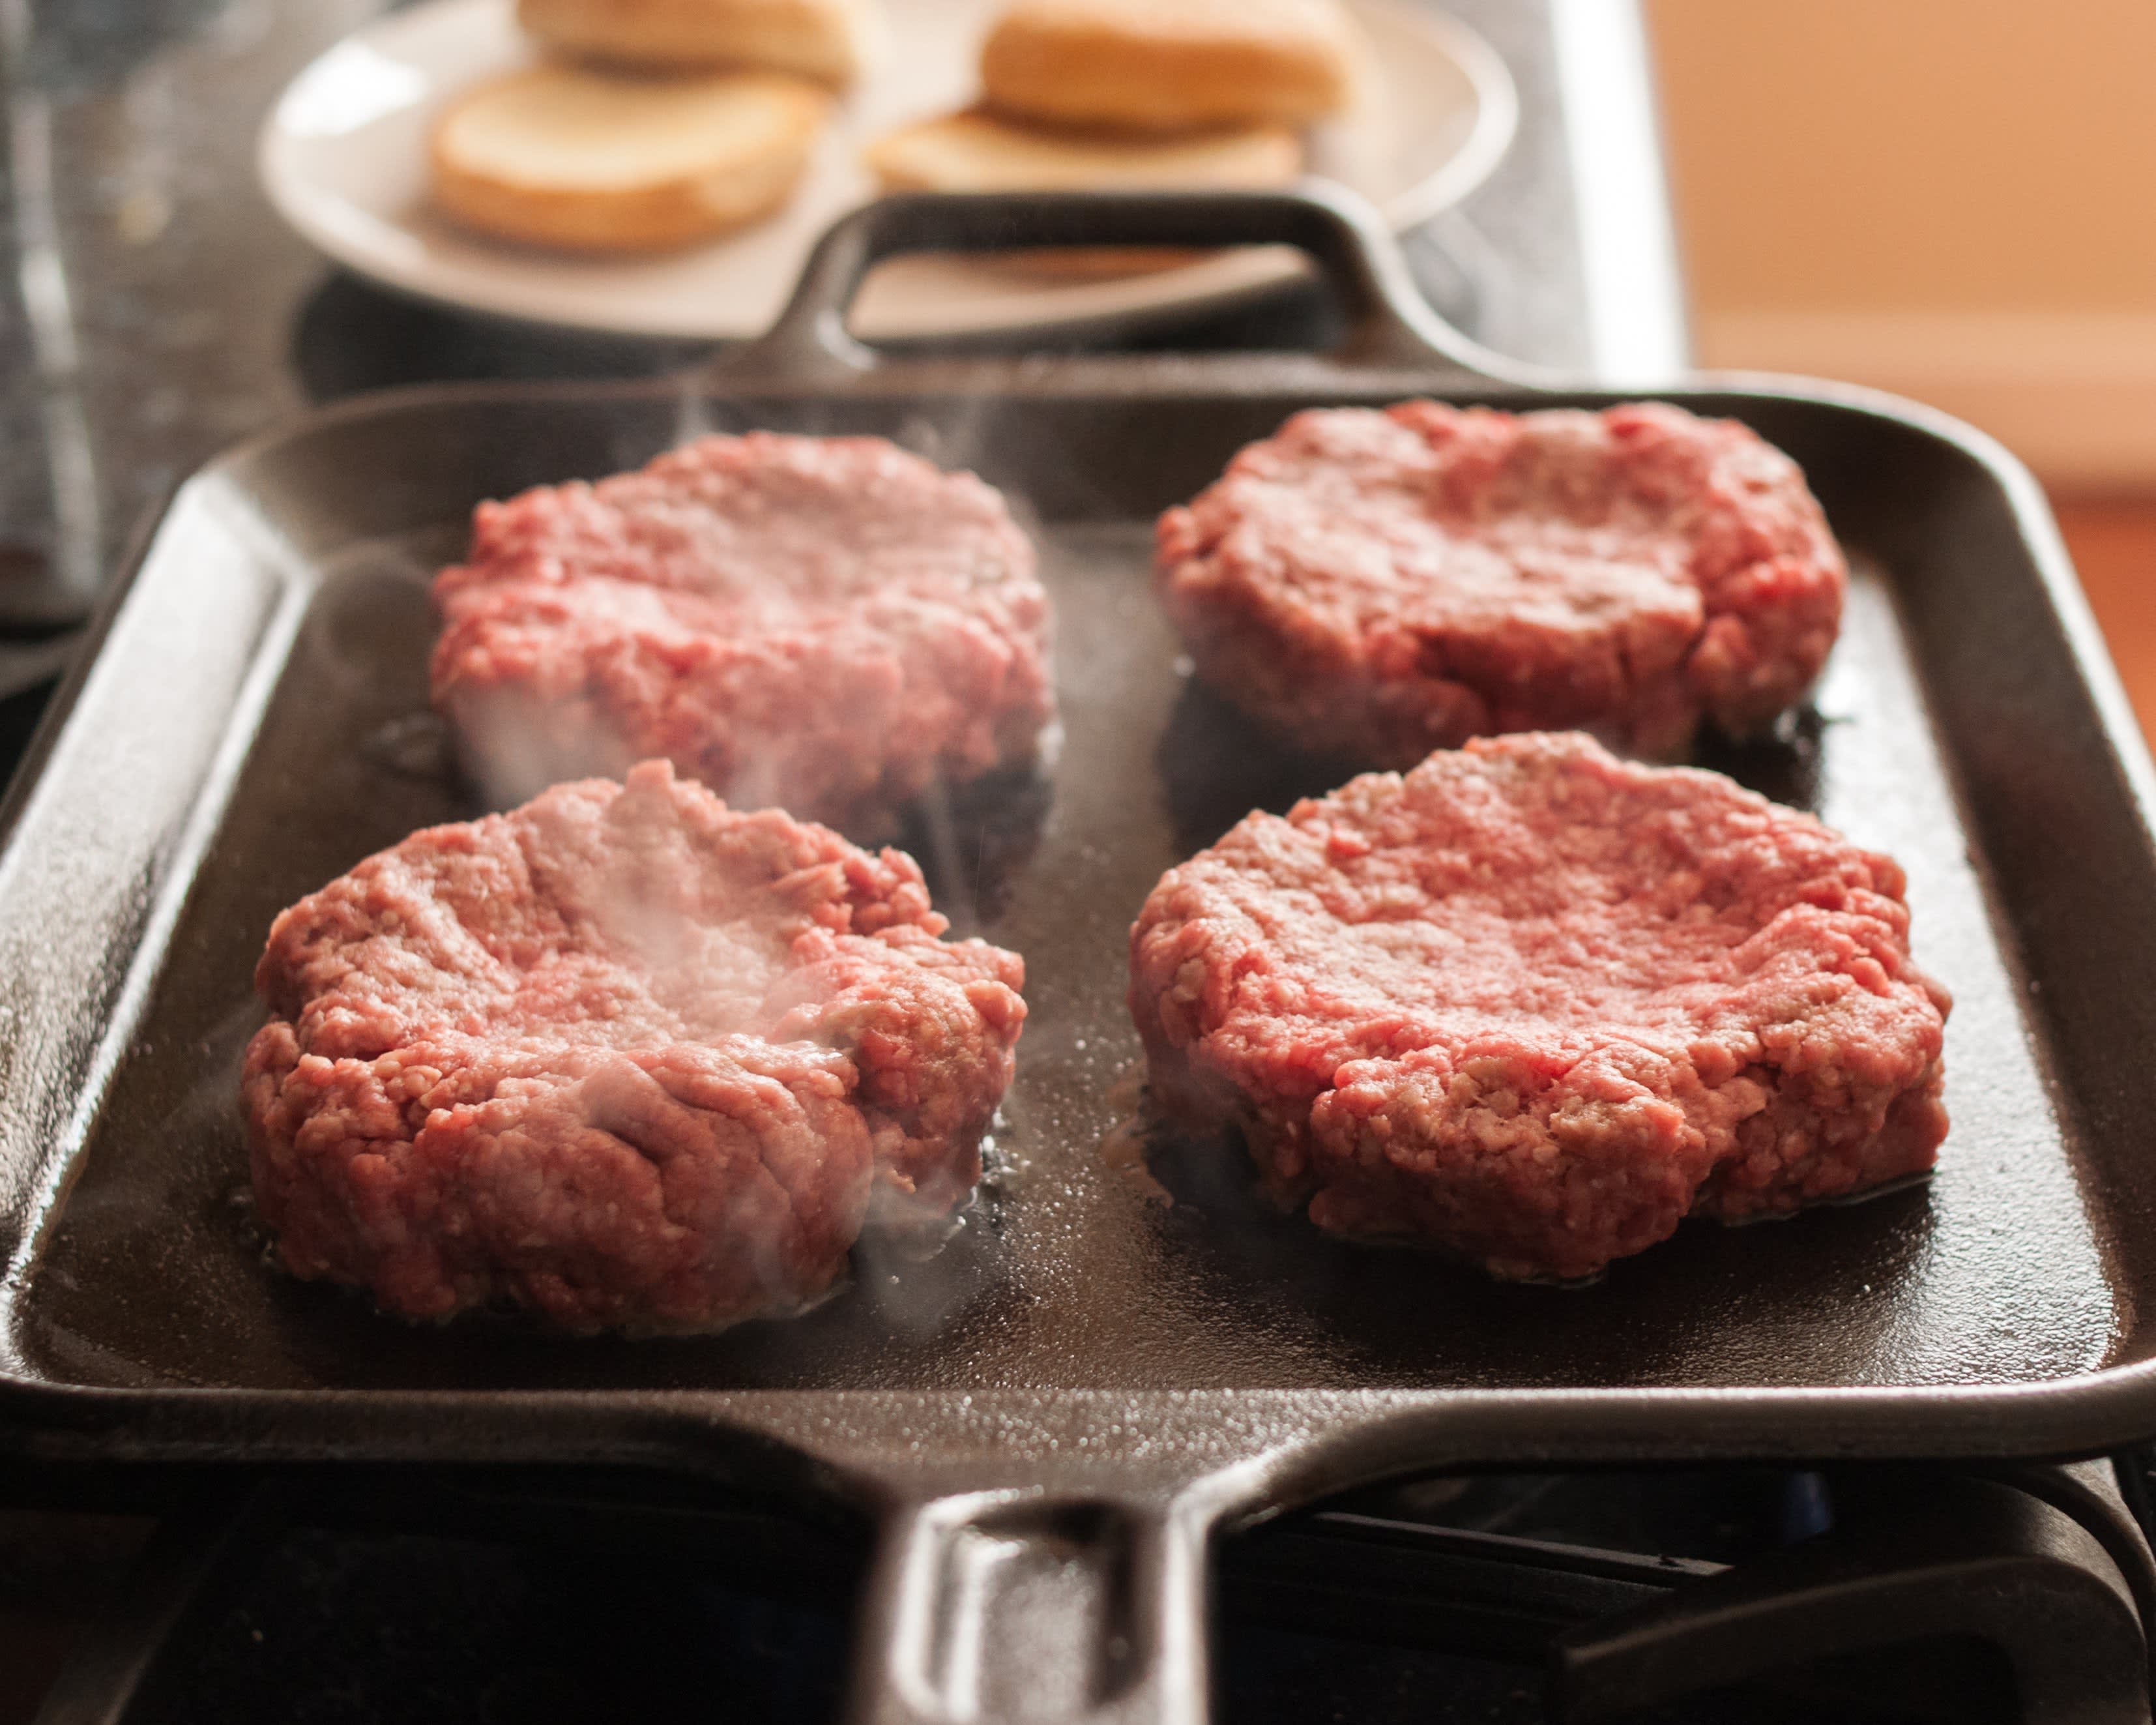 How To Make Burgers (Easy Stovetop Method)